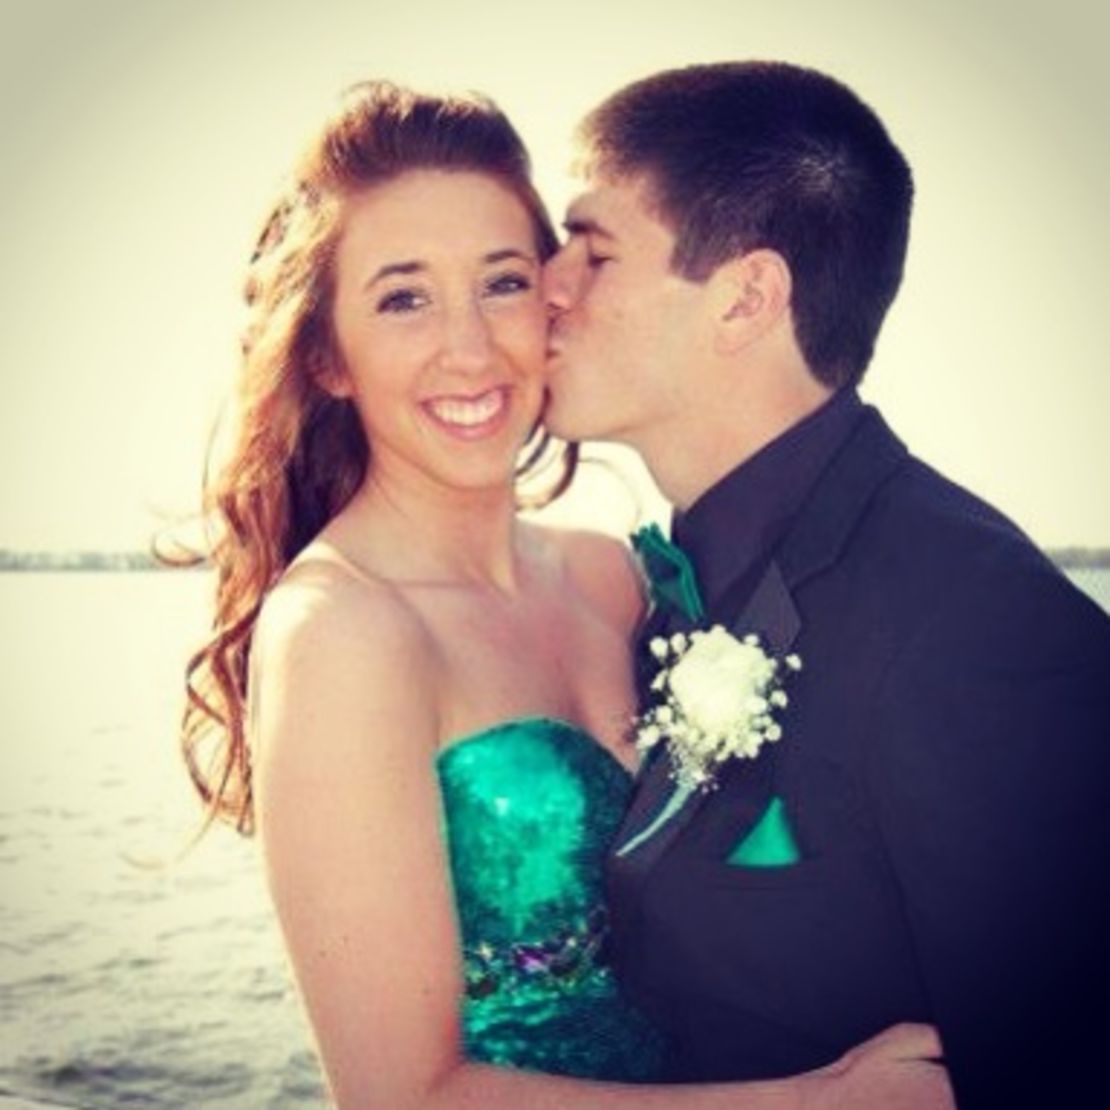 Alyssa J. O'Neill getting a kiss from Dylan Ukasic during senior prom pictures at the Erie, PA bayfront